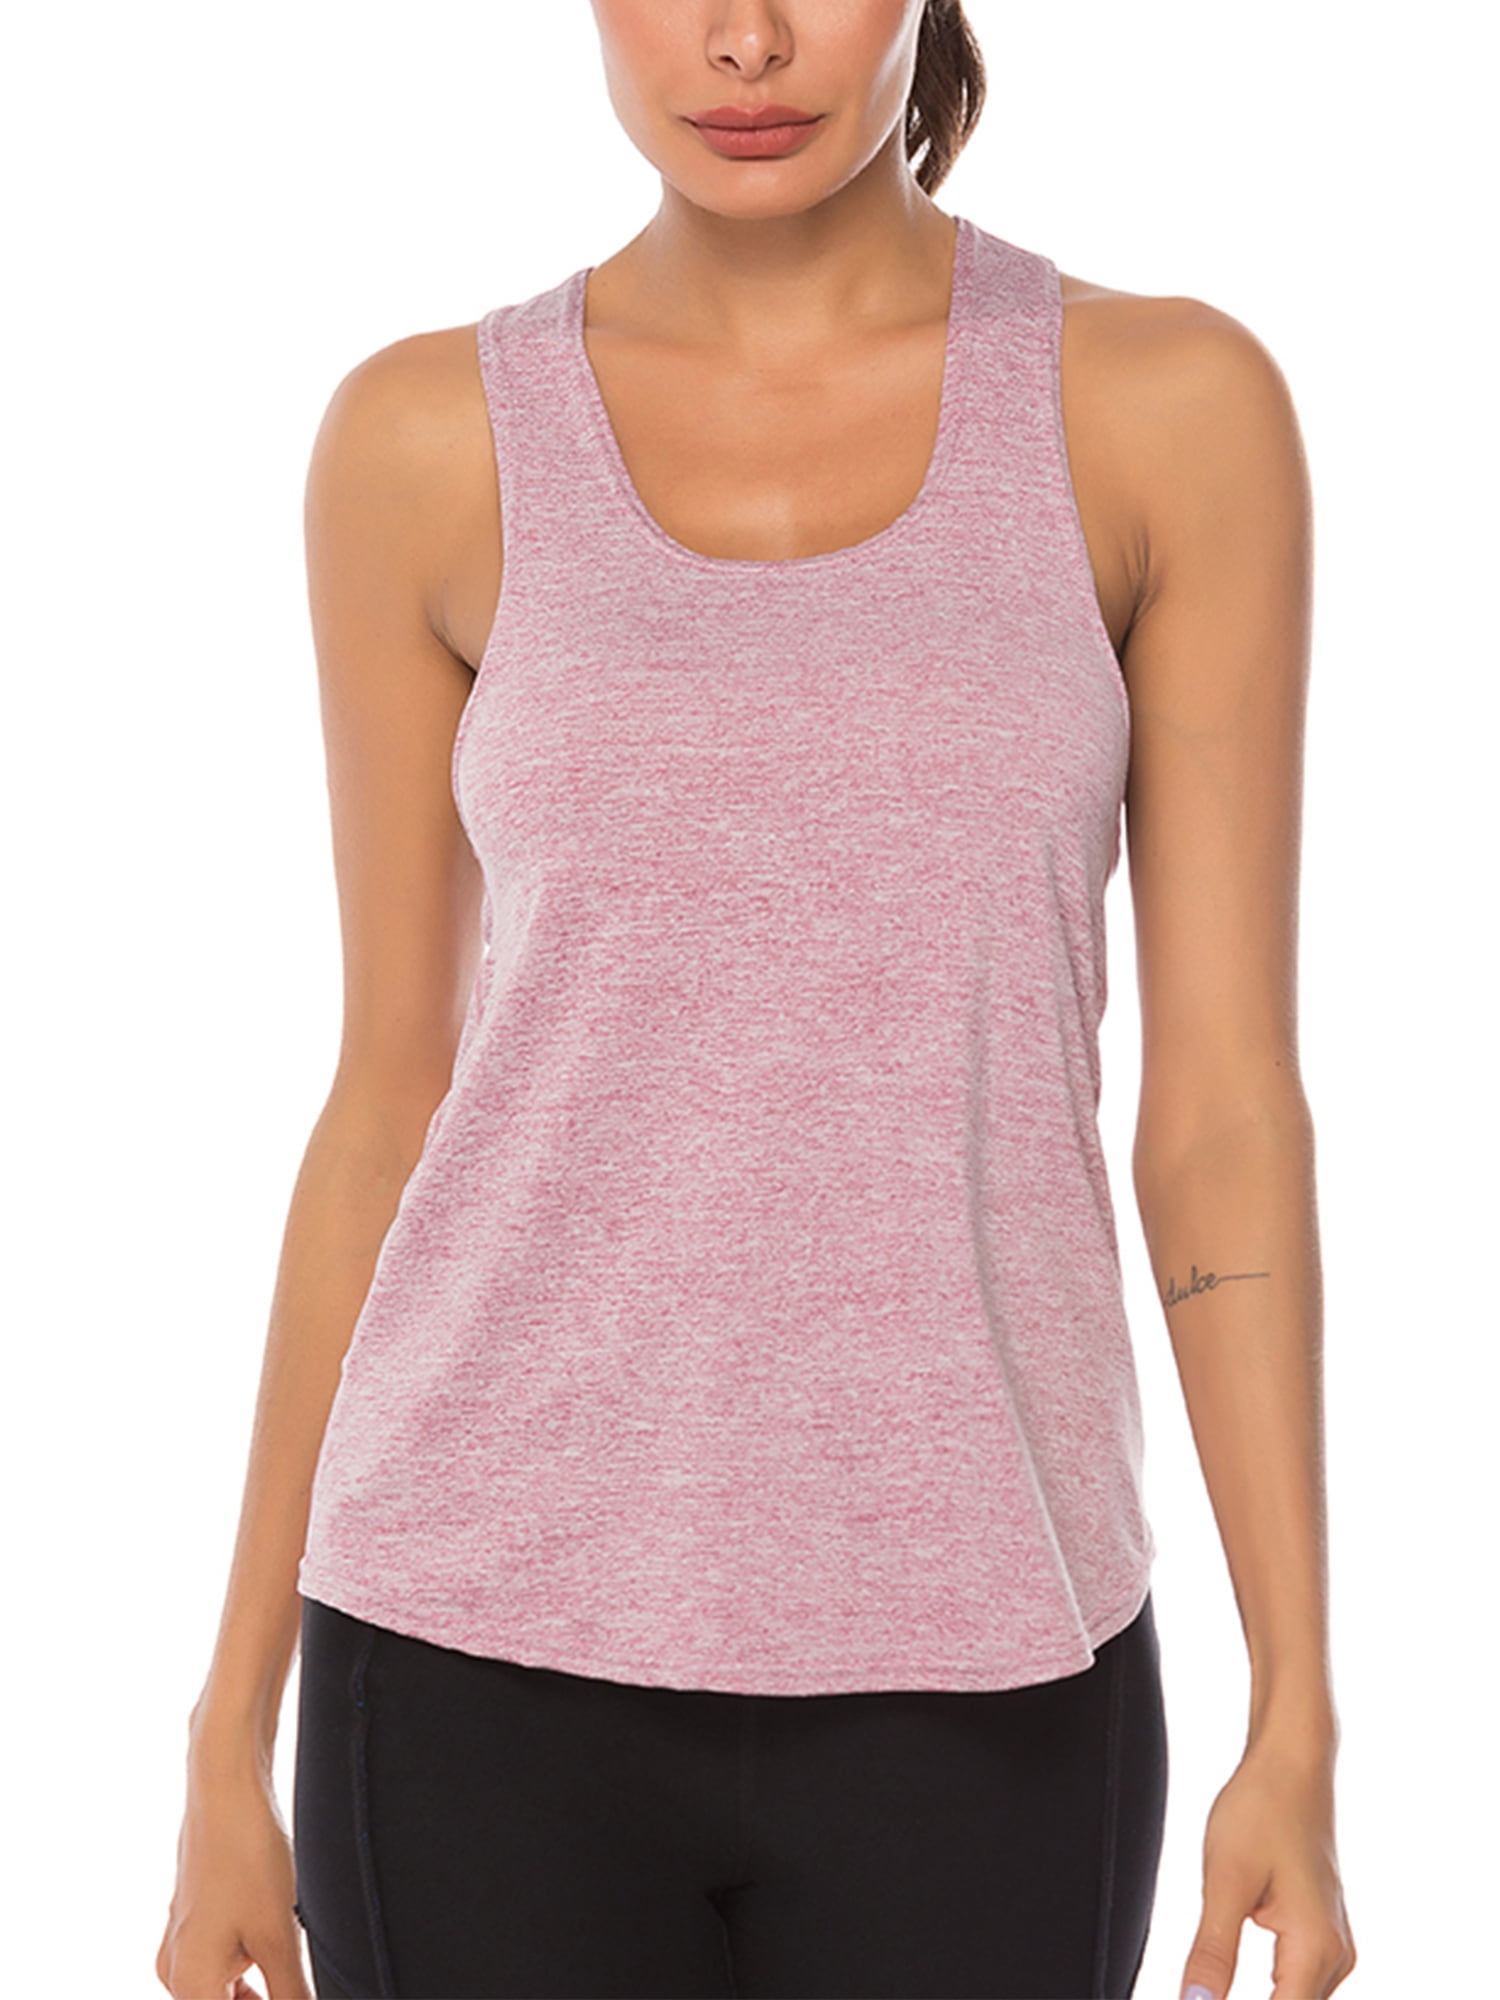 Women Active Crop Tank Sports Performance Racerback Gym Sleeveless Tops for Casual Workout Fitness Running Yoga